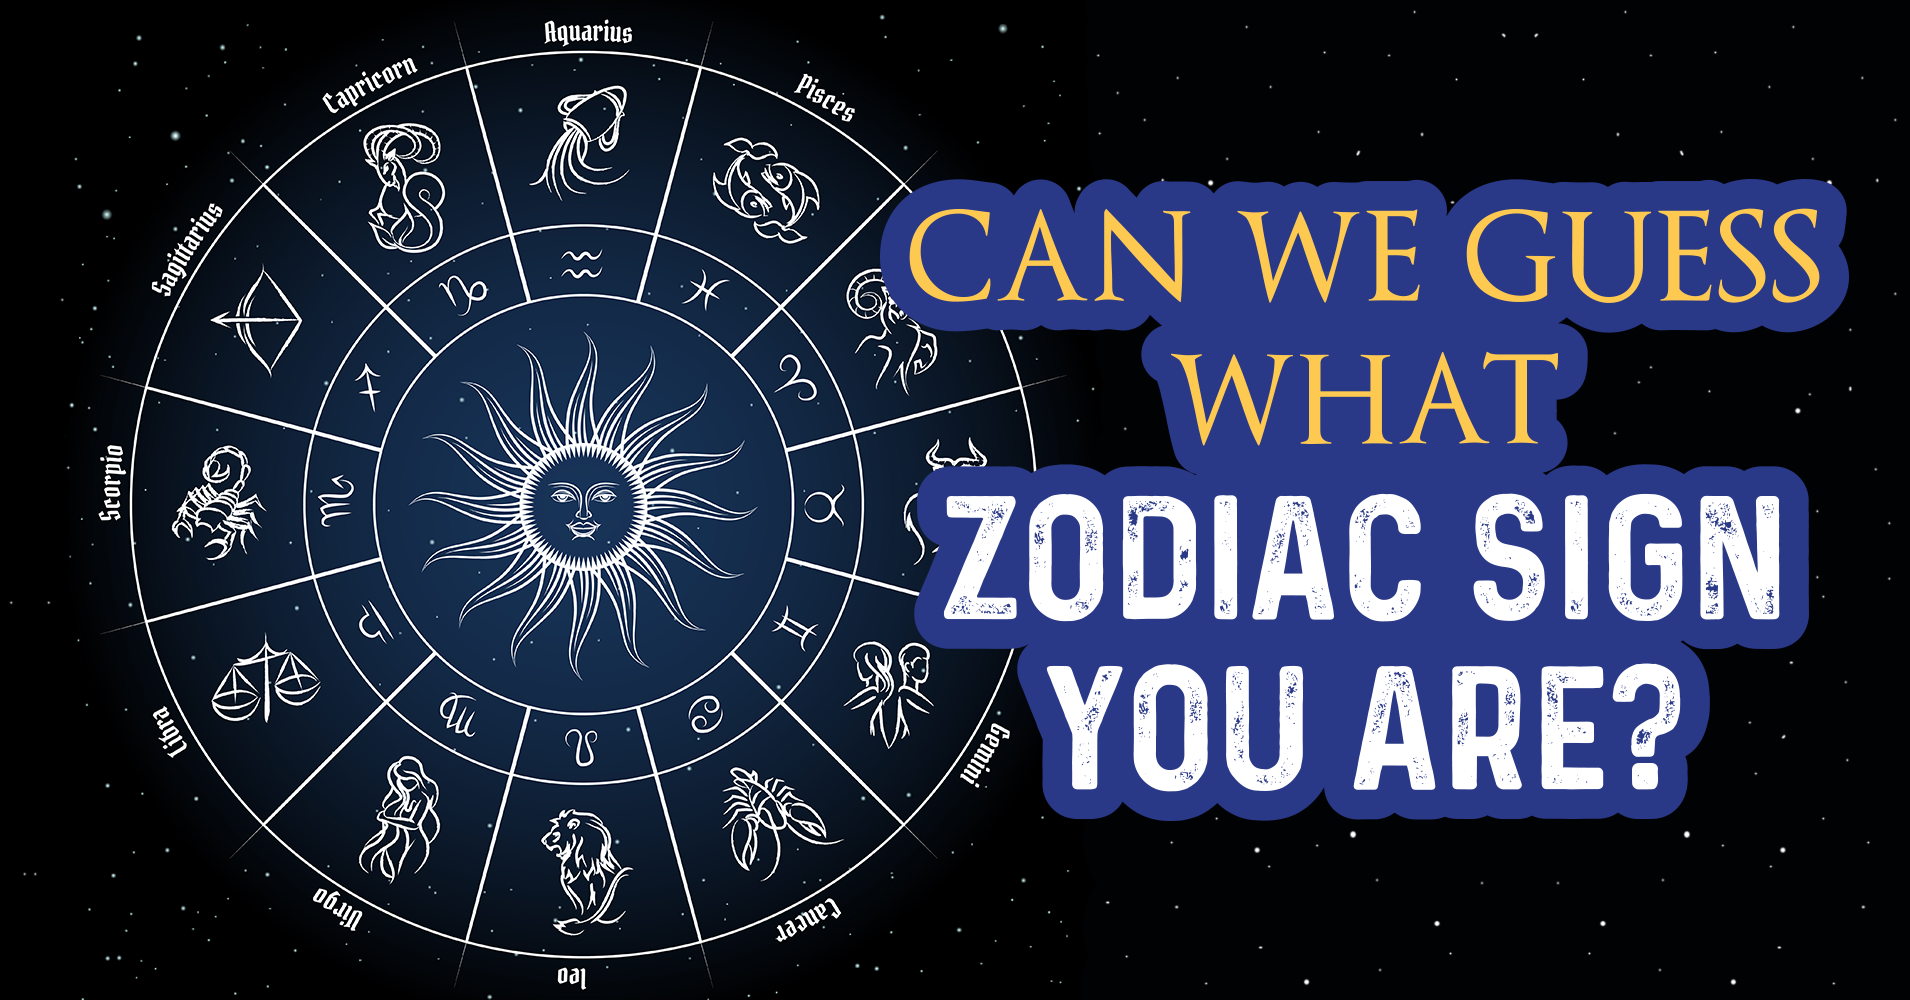 Kostumer Lav oase Can We Guess What Zodiac Sign You Are? - Quiz - Quizony.com